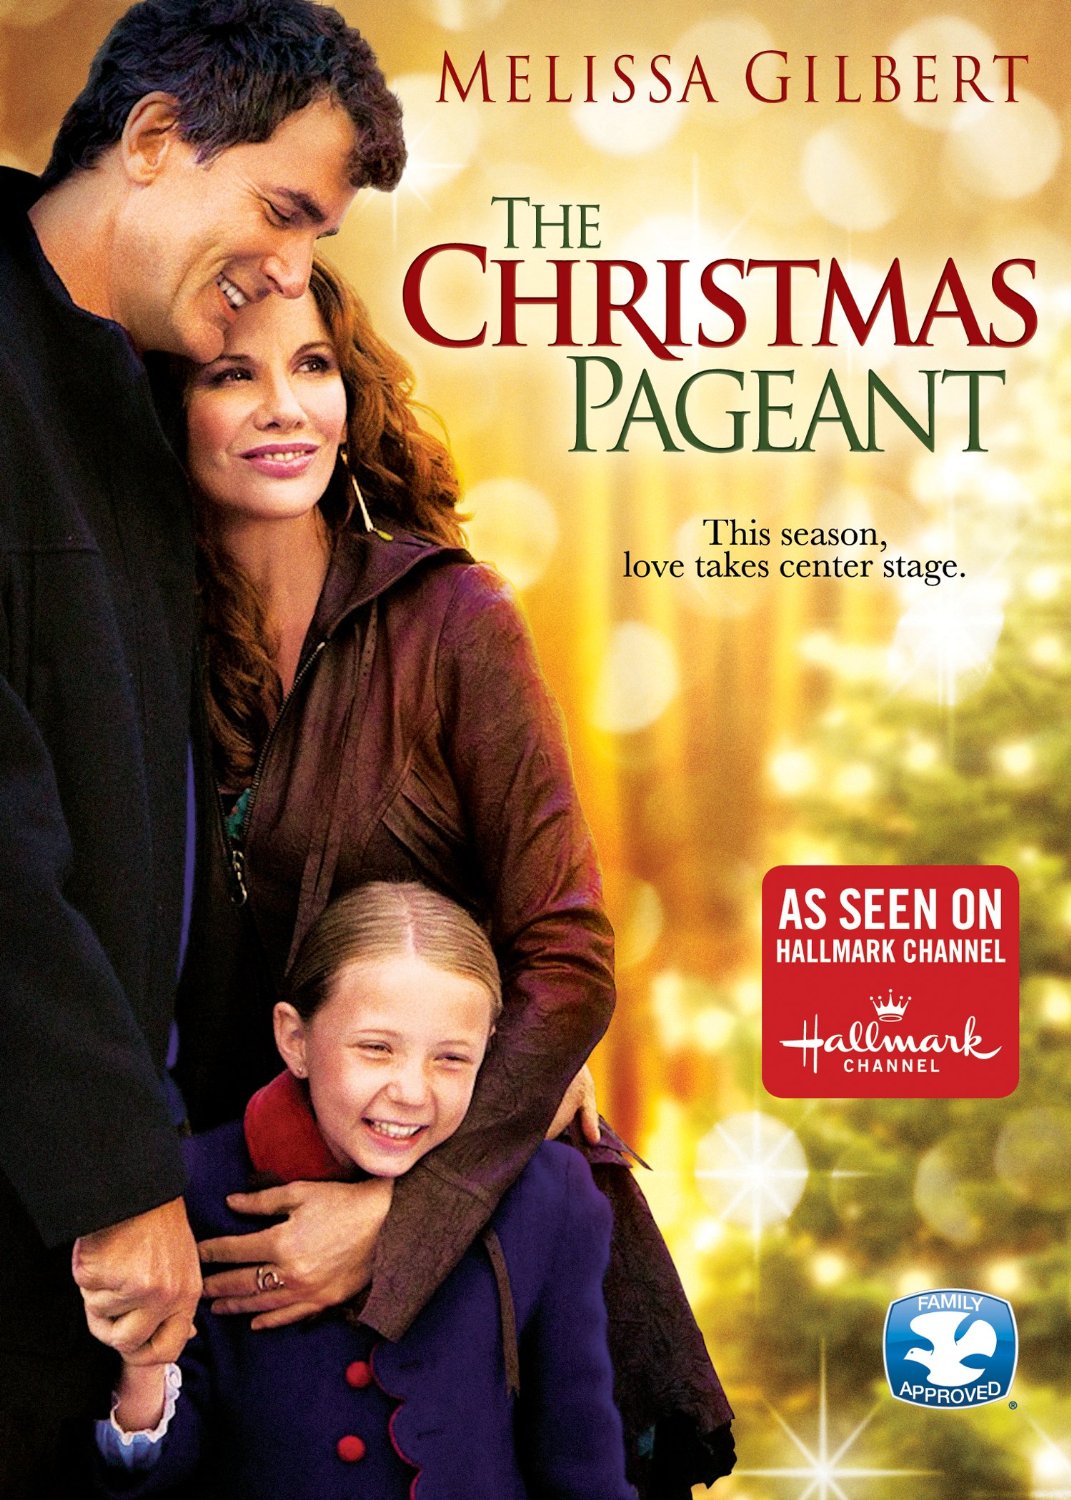 The Christmas Pageant (2011) Screenshot 2 